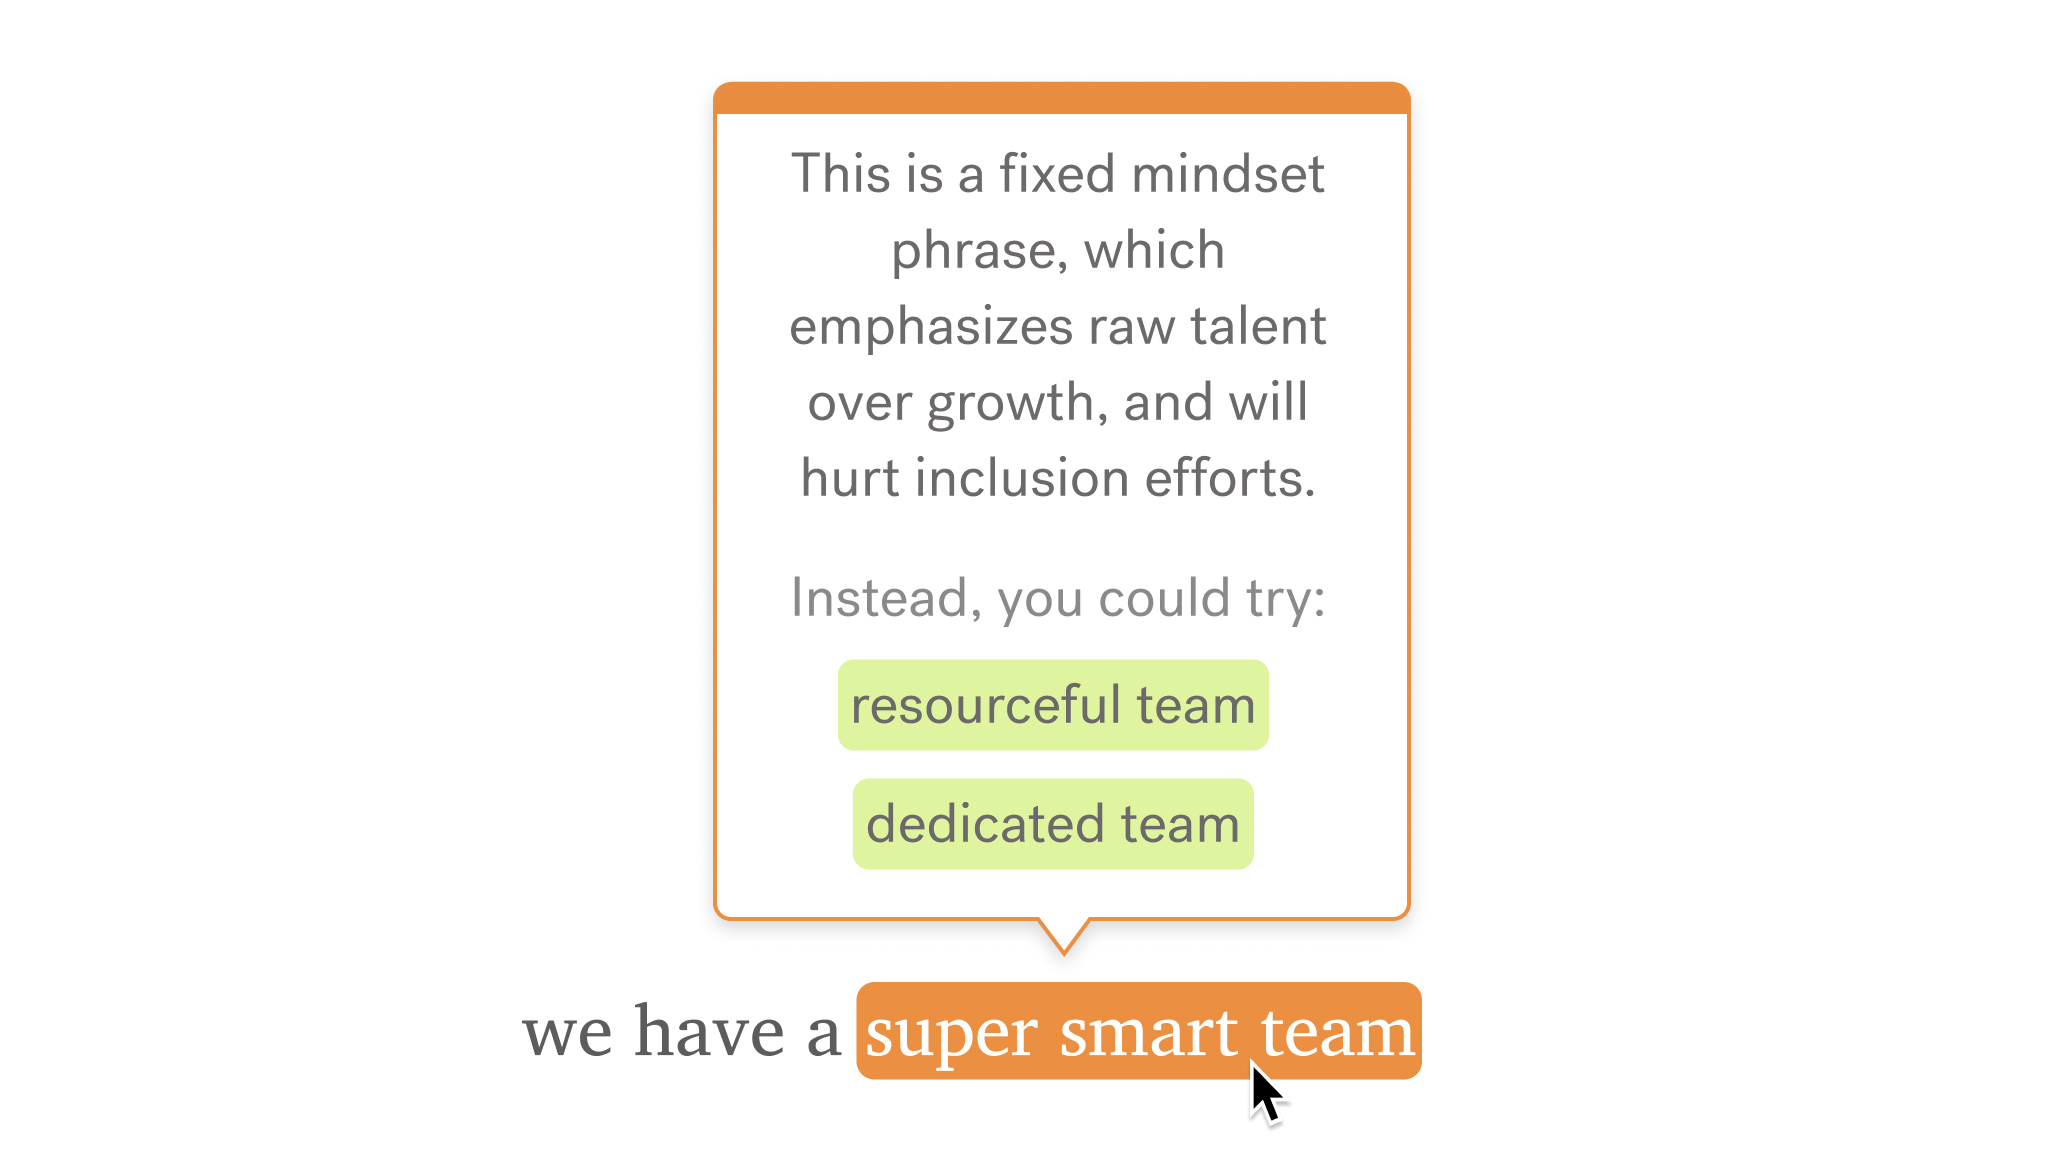 screenshot of Textio employer brand language guidance for phrase "super smart team" with tip that reads "This is a fixed mindset phrase, which emphasizes raw talent over growth, and will hurt inclusion efforts. Instead you could try: resourceful team, dedicated team"